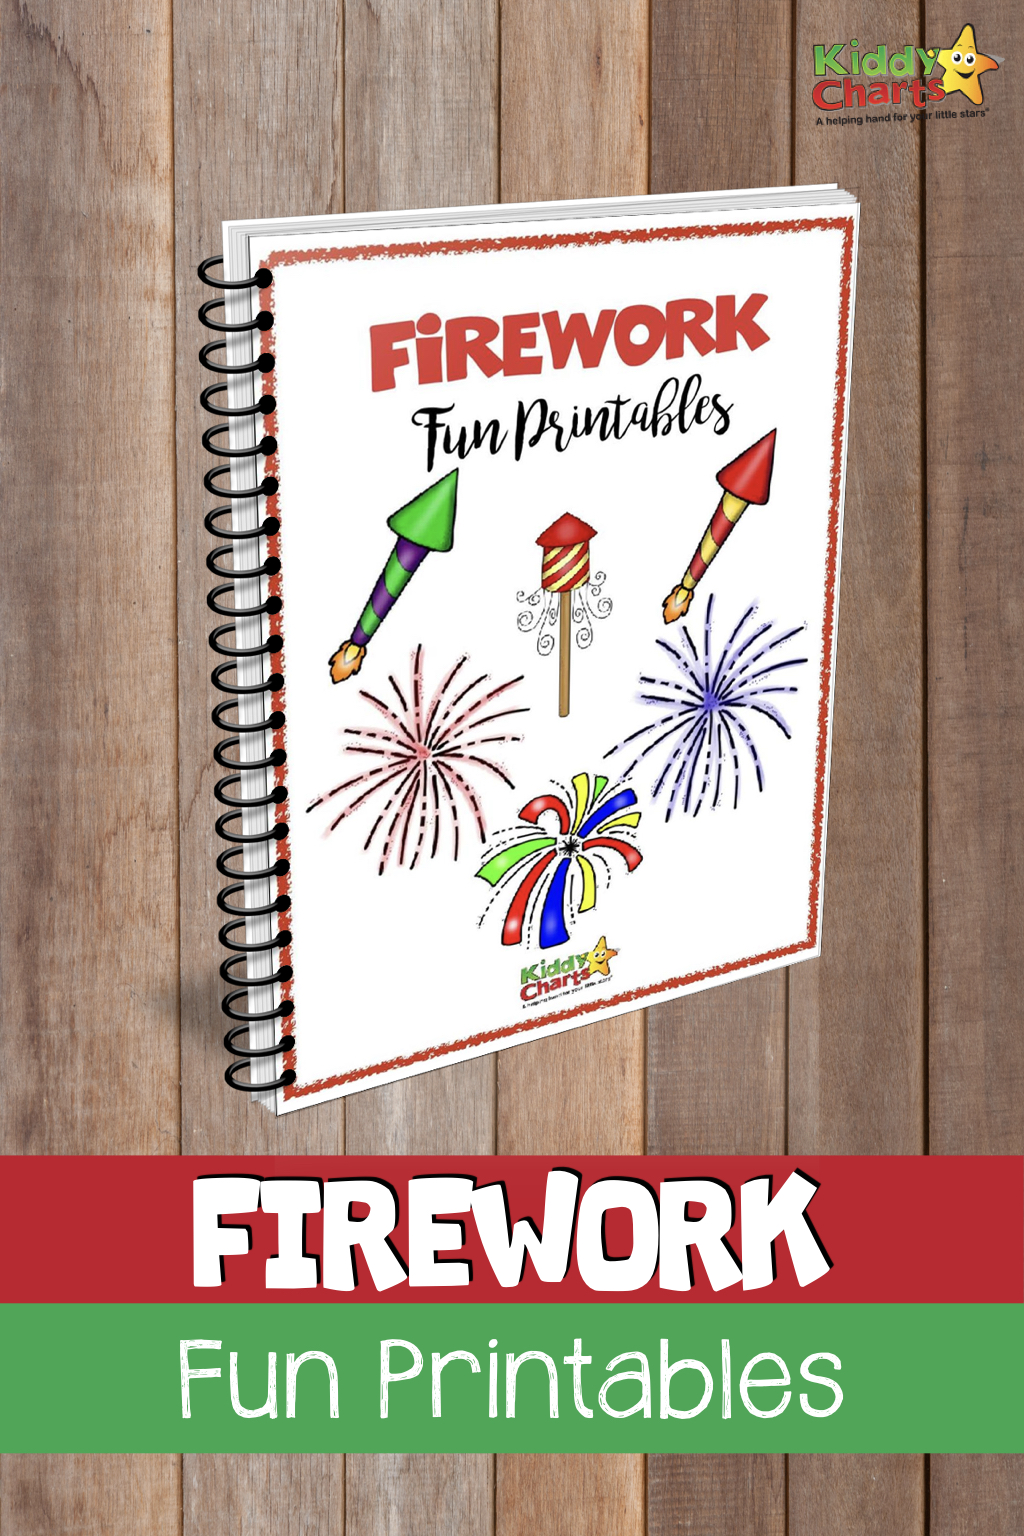 We have a gorgeous mini eBook of free firework resources and printables for the Fourth of July, and Bonfire Night; download it, you and the kids will LOVE it!